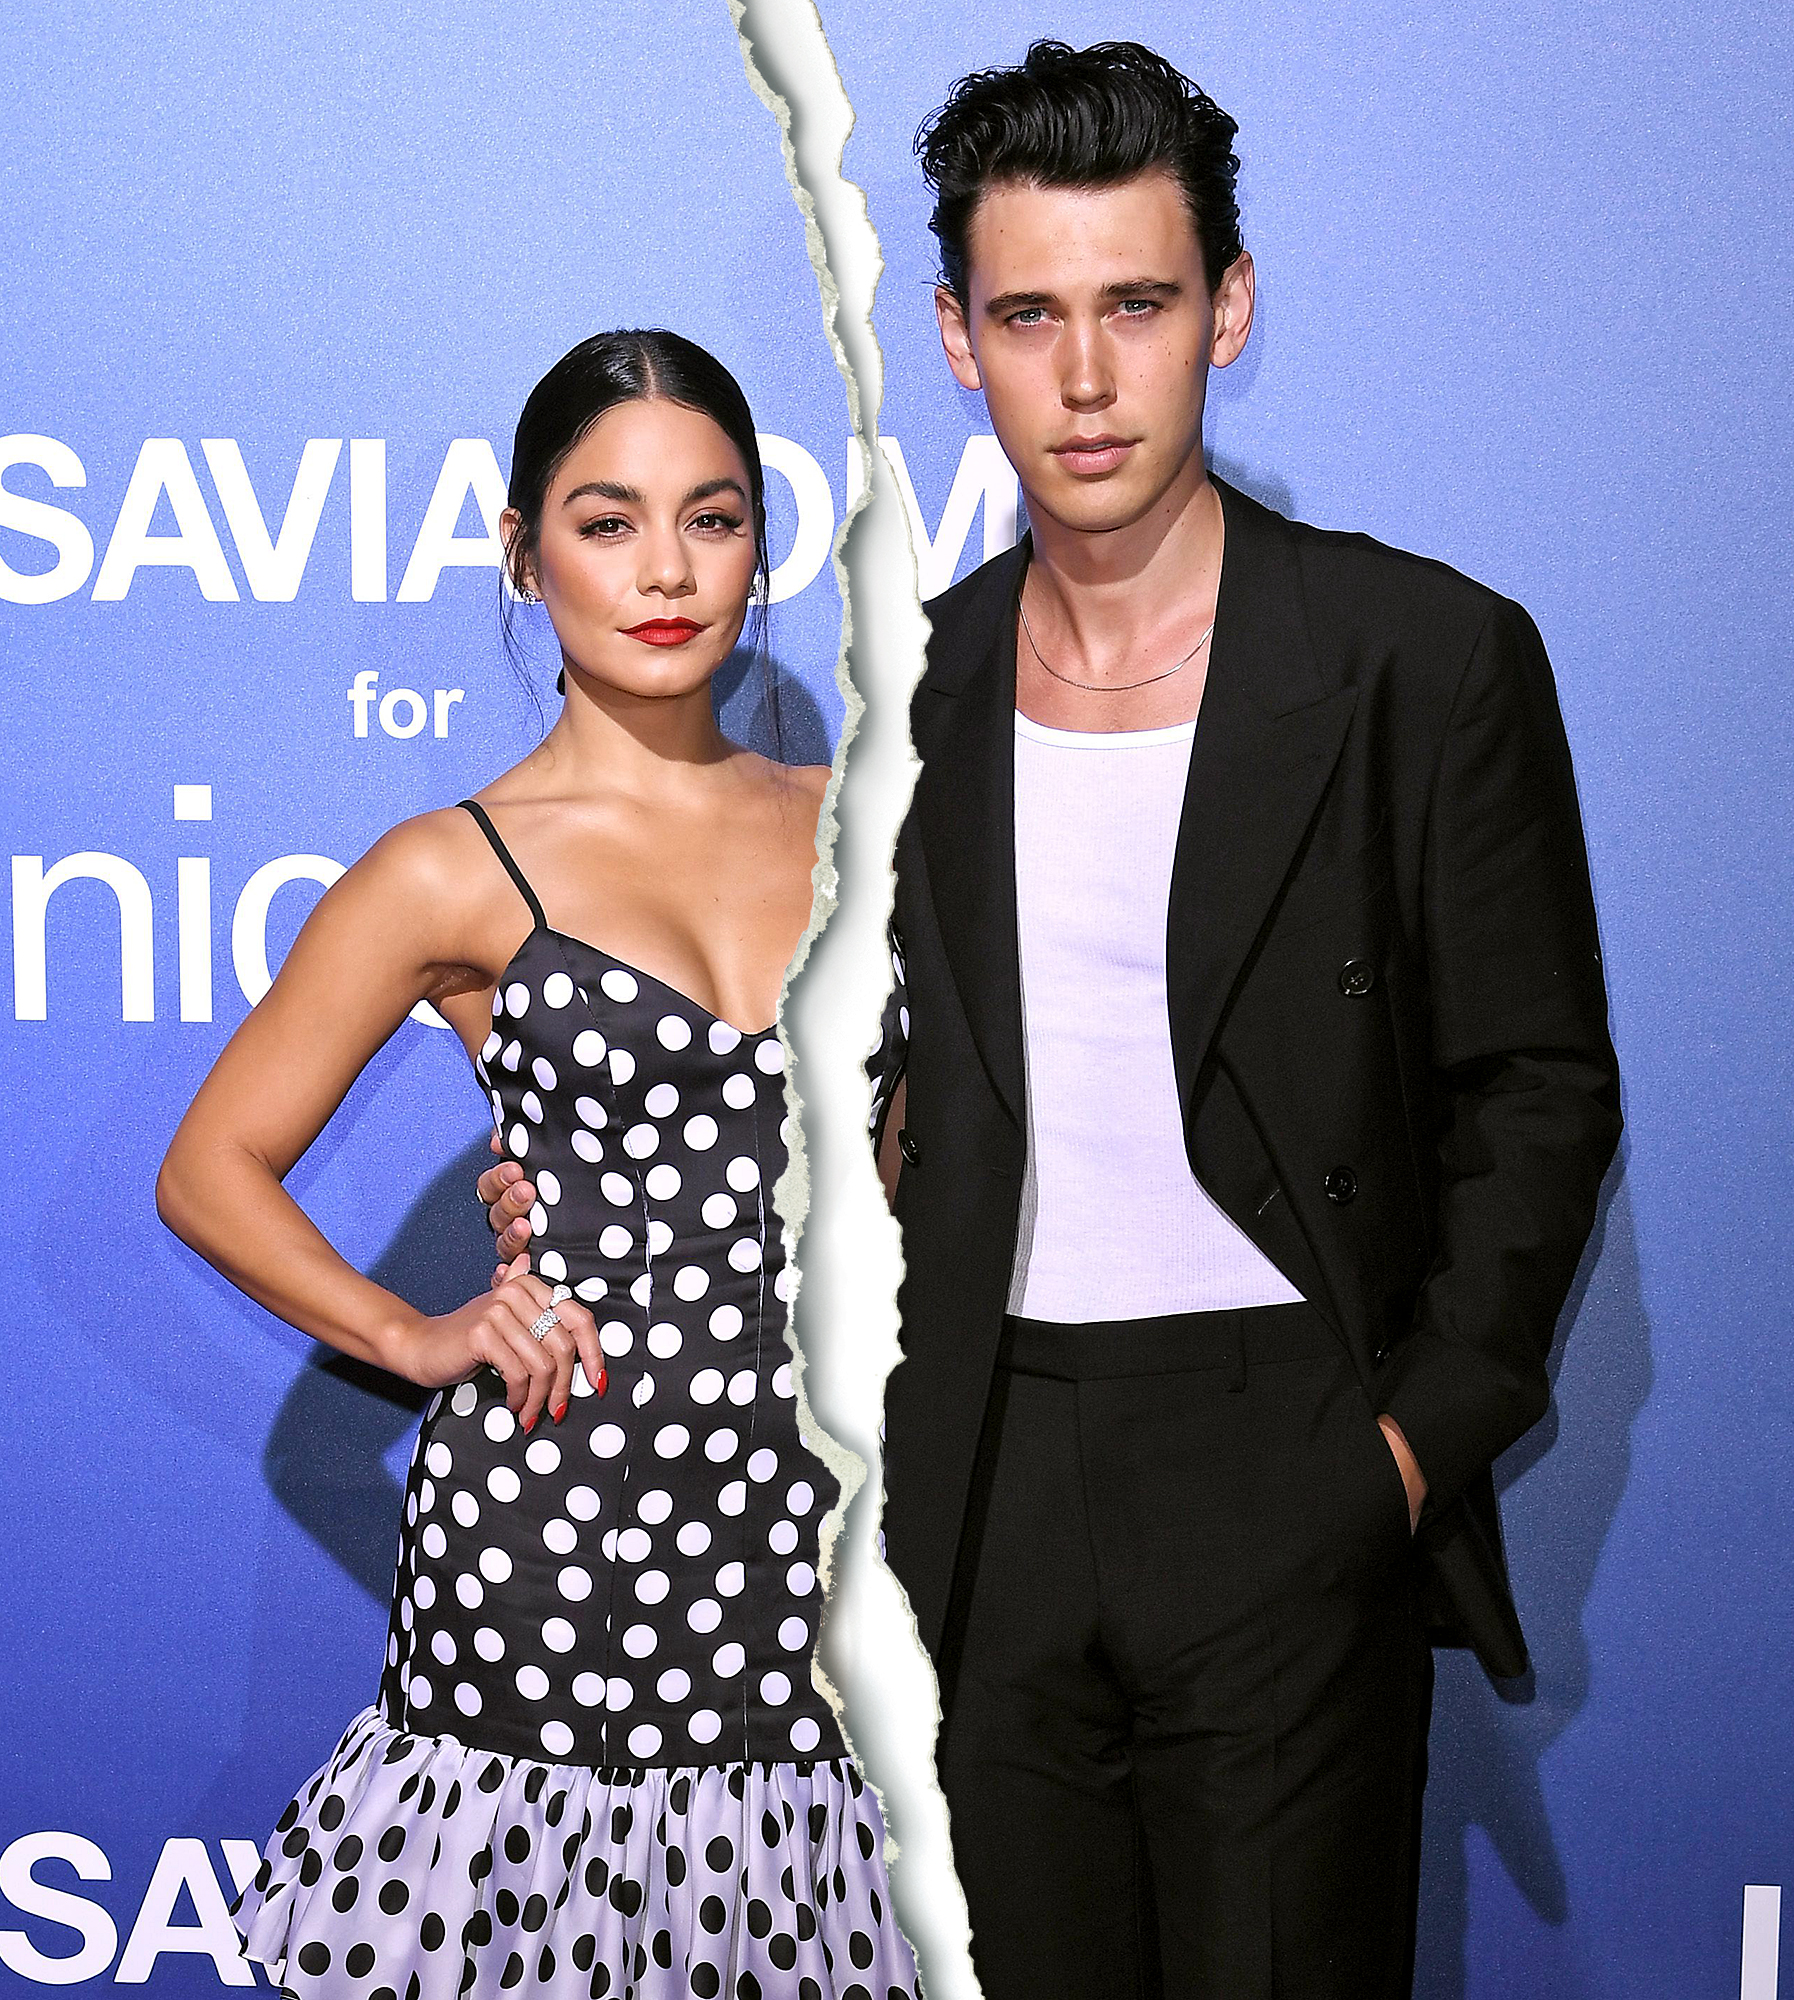 Vanessa Hudgens Encourages 'Peace' After Run-in With Austin Butler